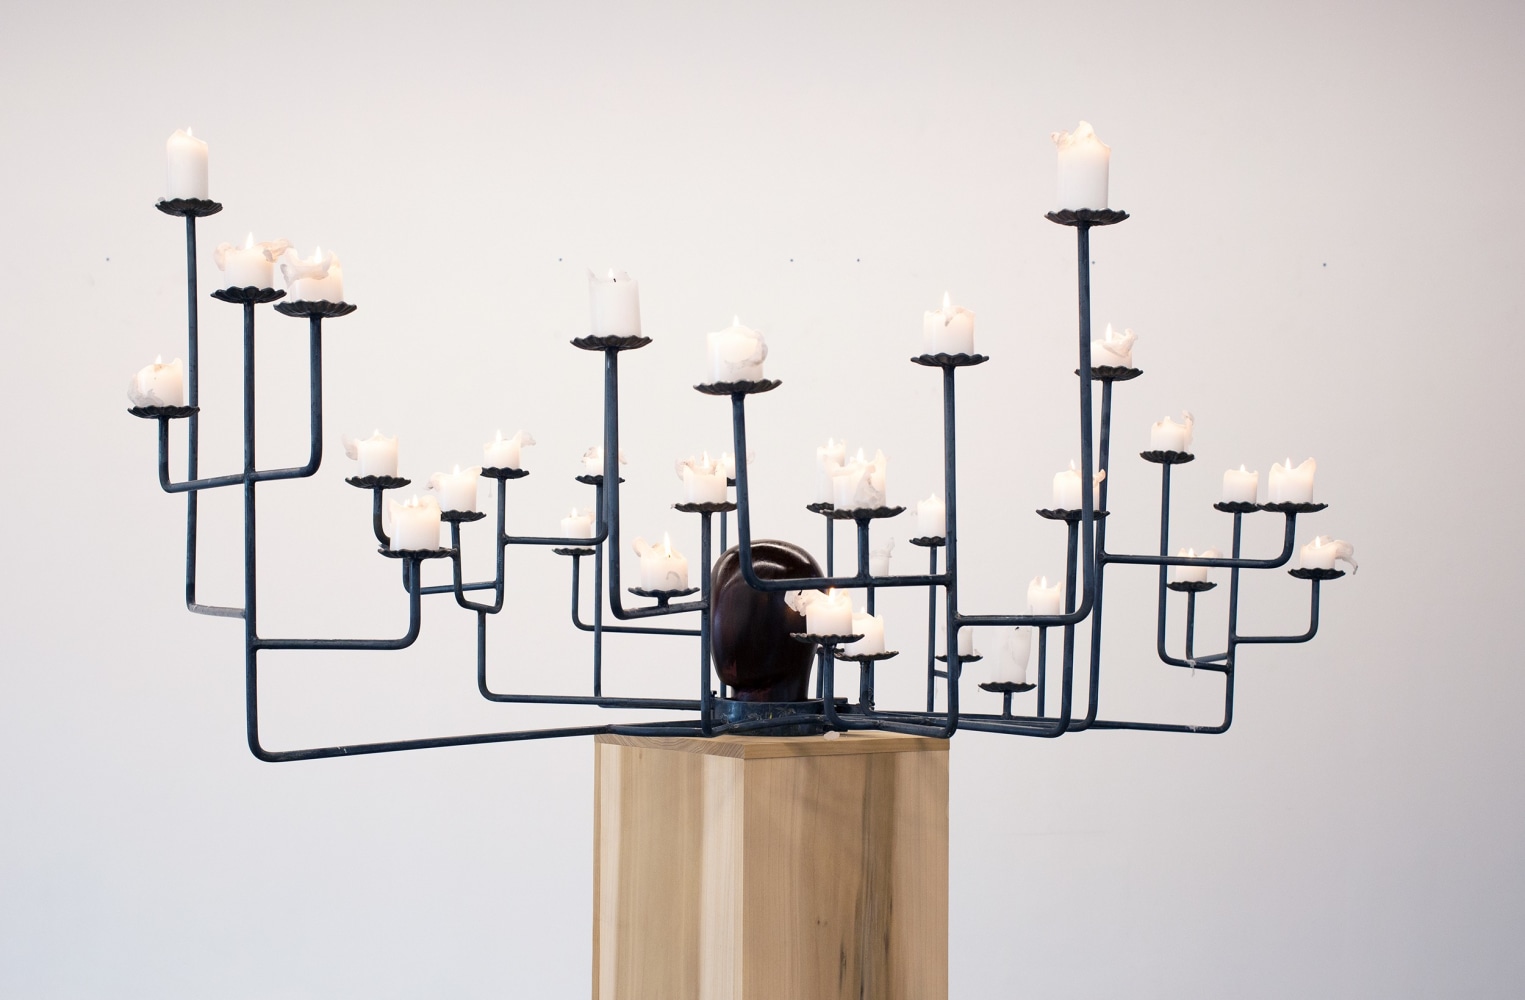 Shackle and Light, 2019
Steel, candles, and flame
37 1/2 x 78 x 69 inches